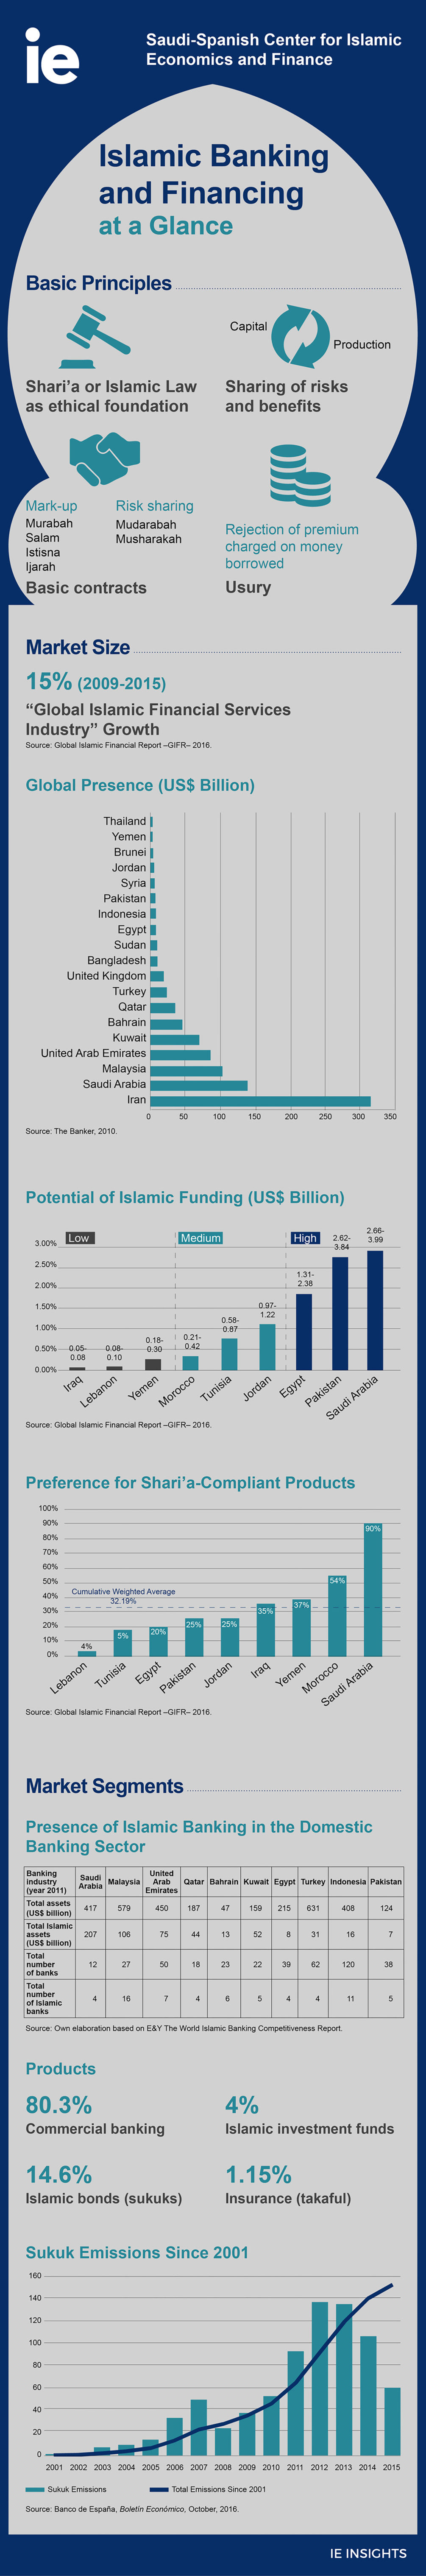 Islamic Banking and Financing at a Glance